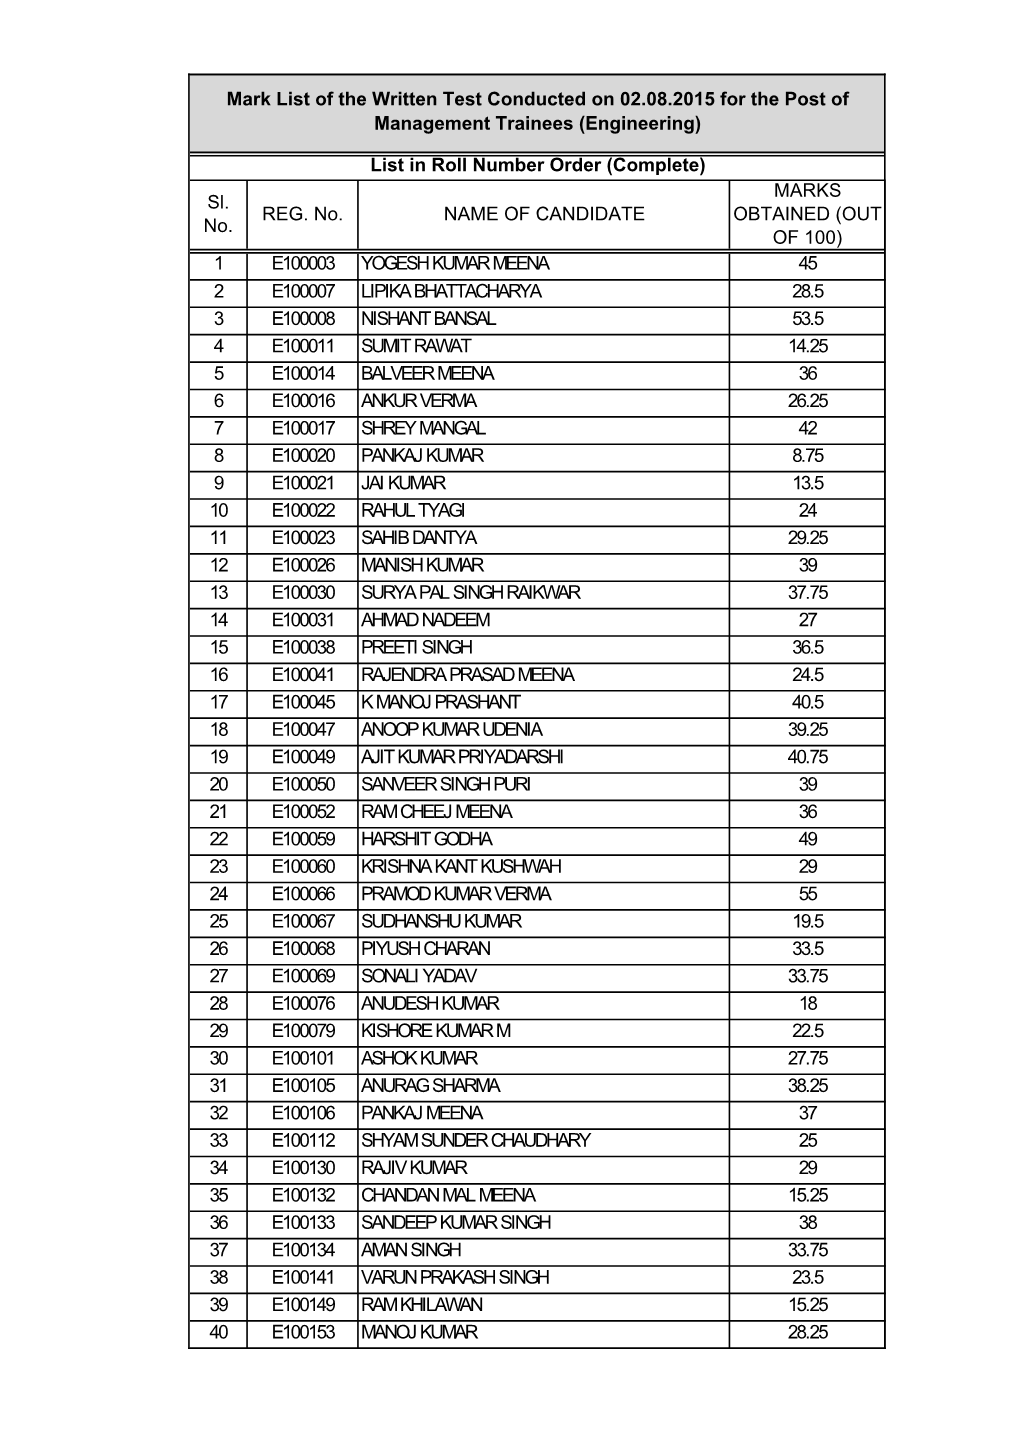 Sl. No. REG. No. NAME of CANDIDATE MARKS OBTAINED